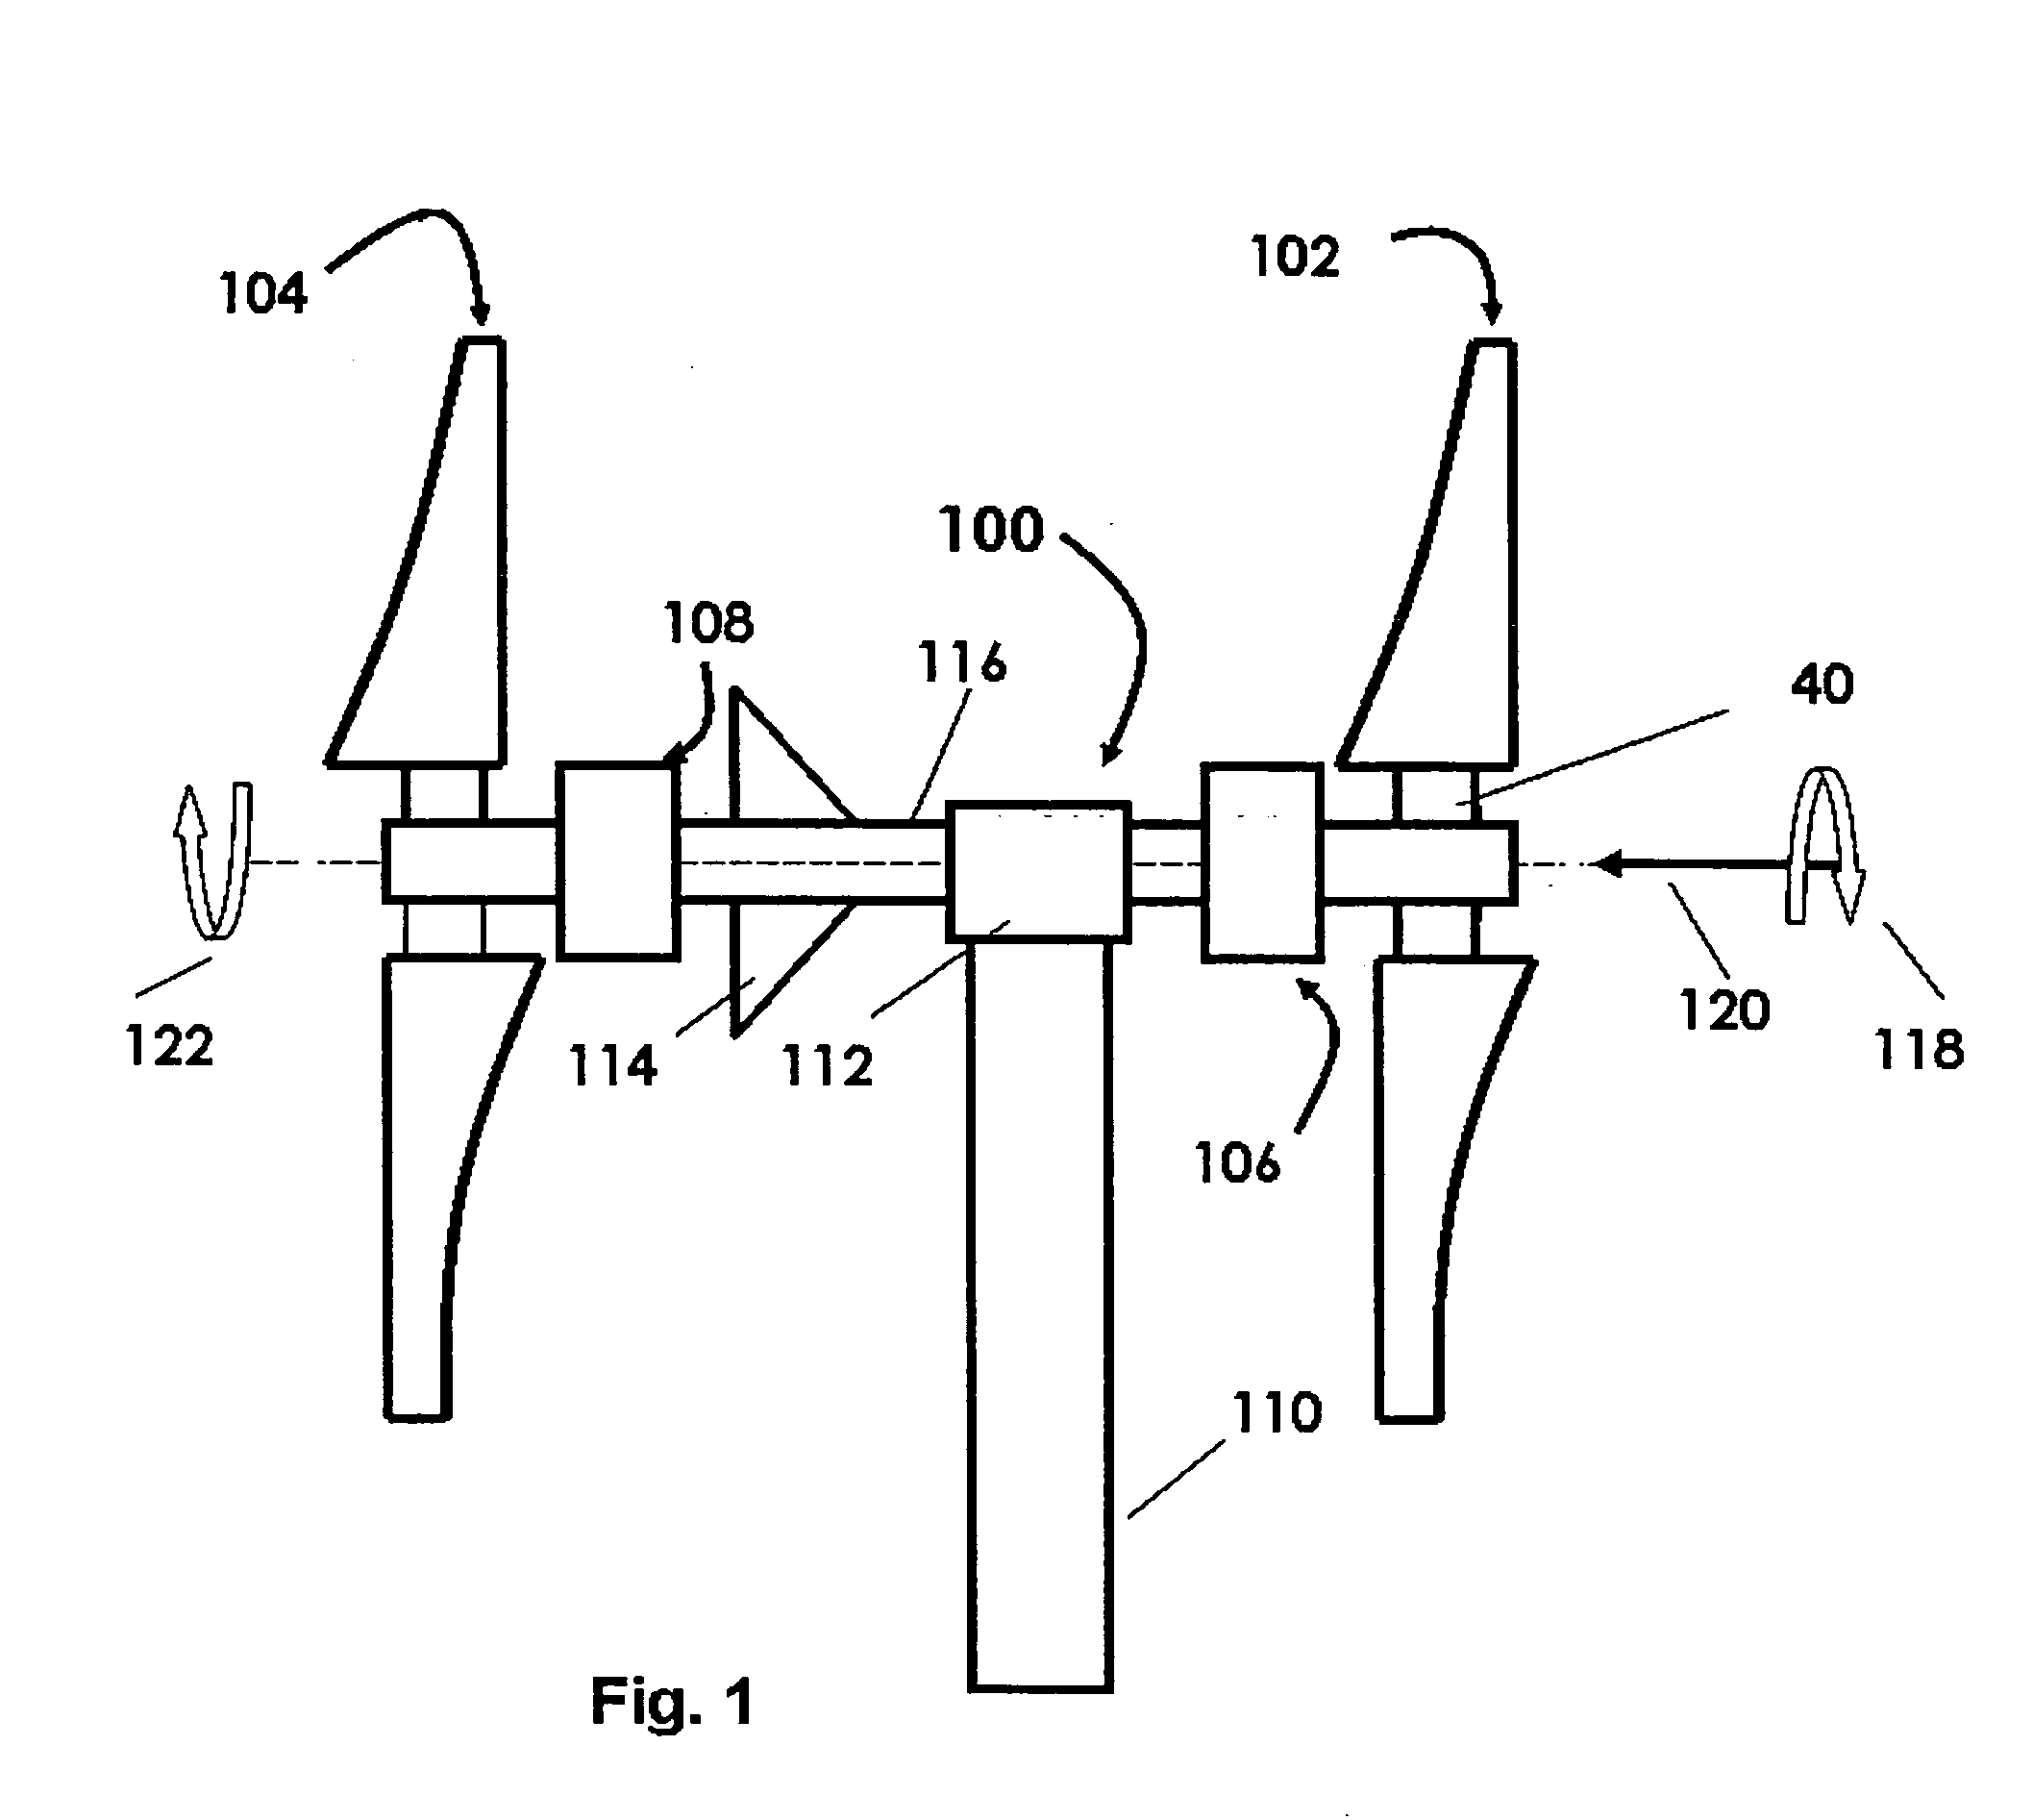 Methods and devices for improving efficiency of wind turbines in low wind speed sites